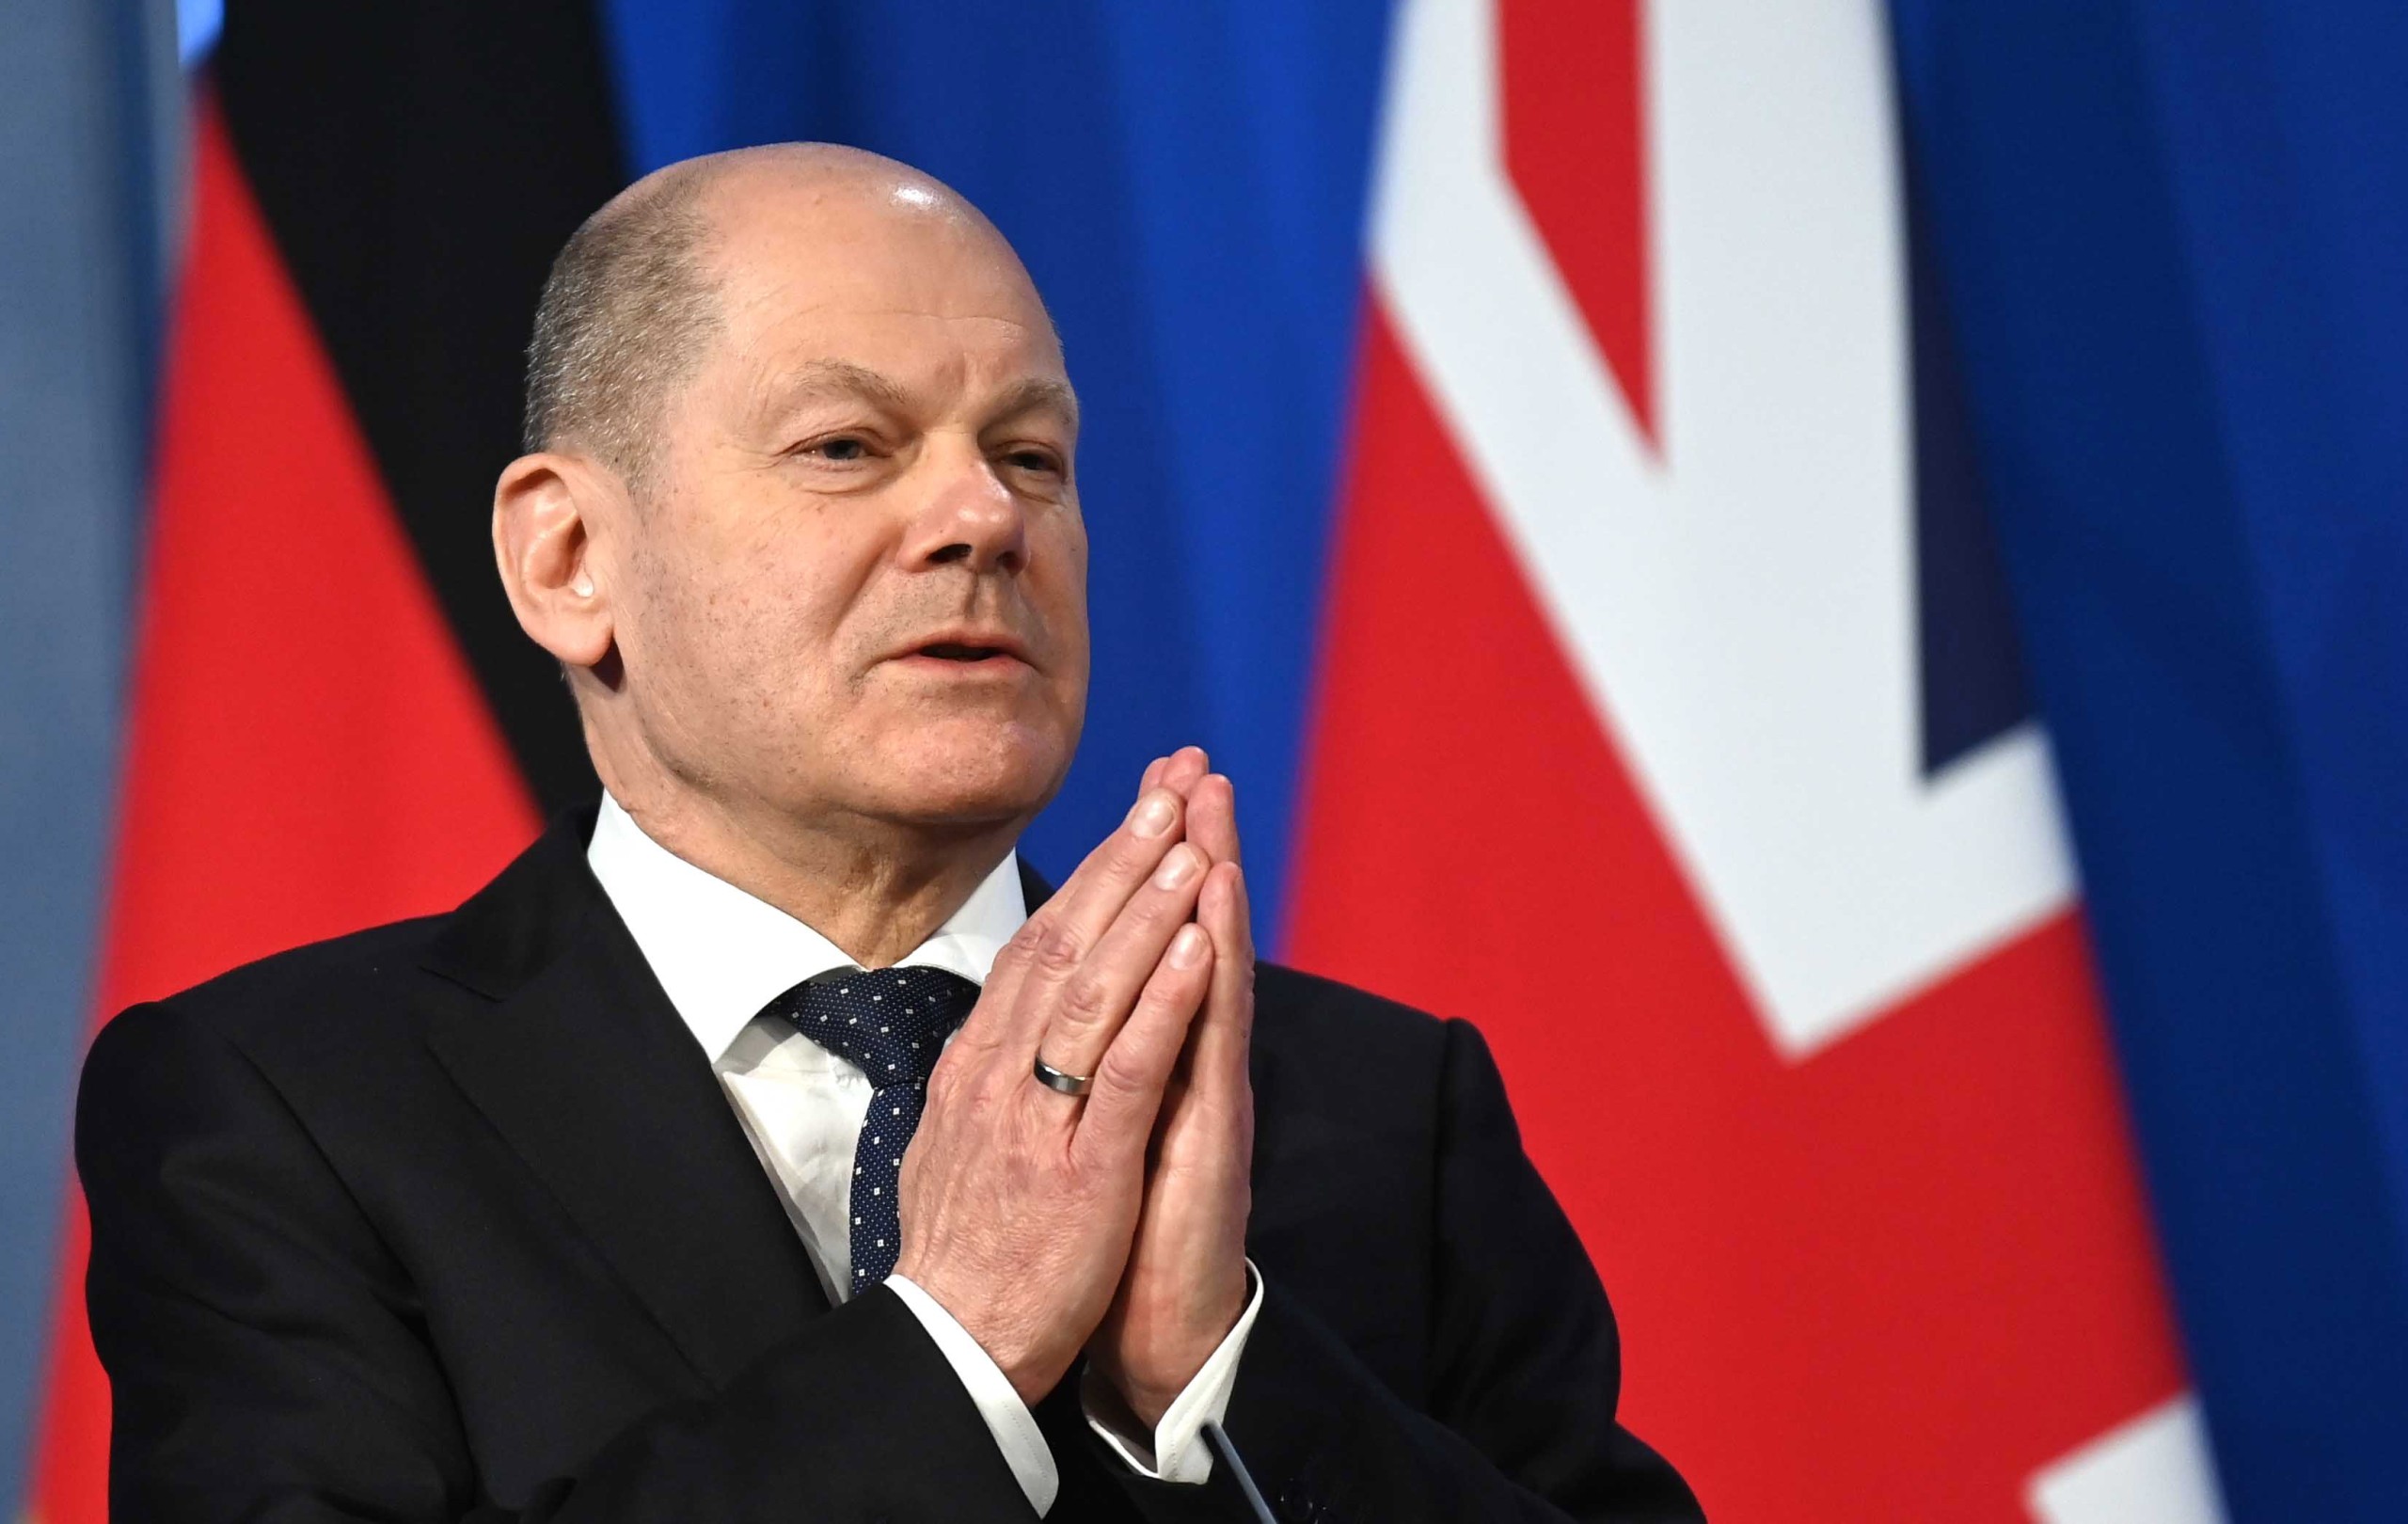 epa09878725 Germany's Chancellor Olaf Scholz speaks at a press conference in Downing Street in London, Britain, 08 April 2022.  EPA/NEIL HALL / POOL